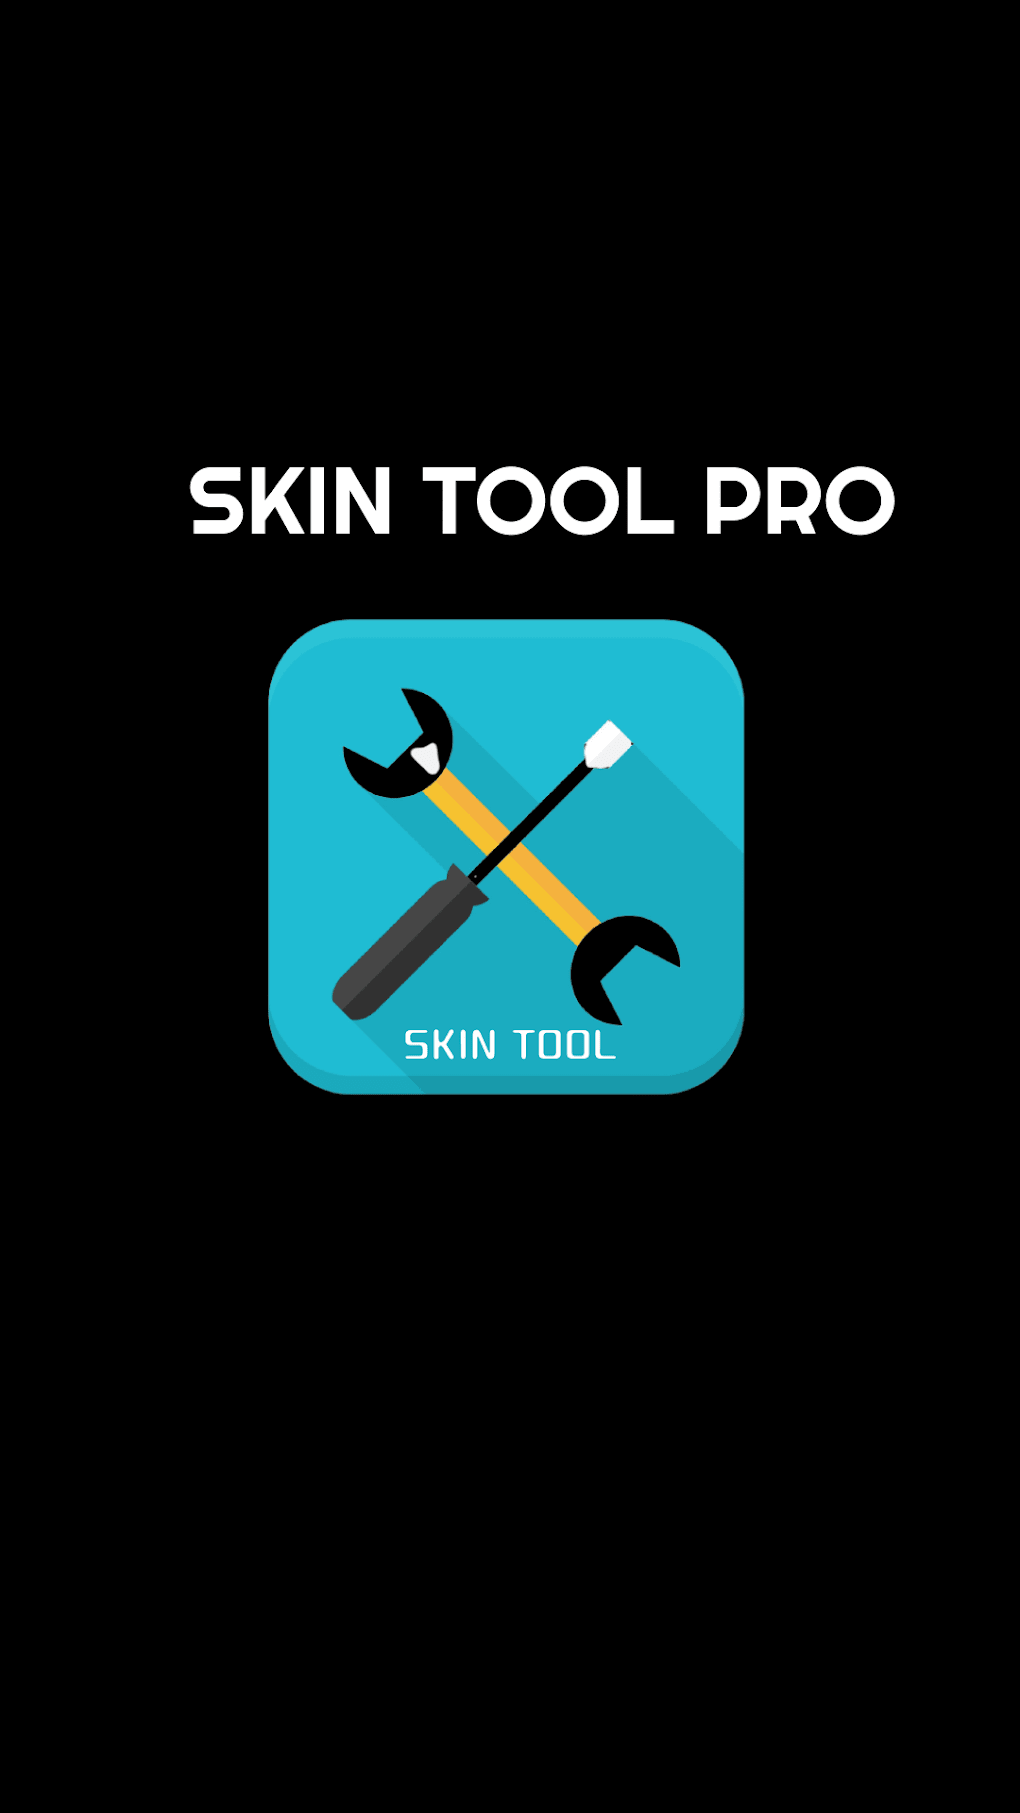 FFF : FF Skin Tool Master for Android - Download